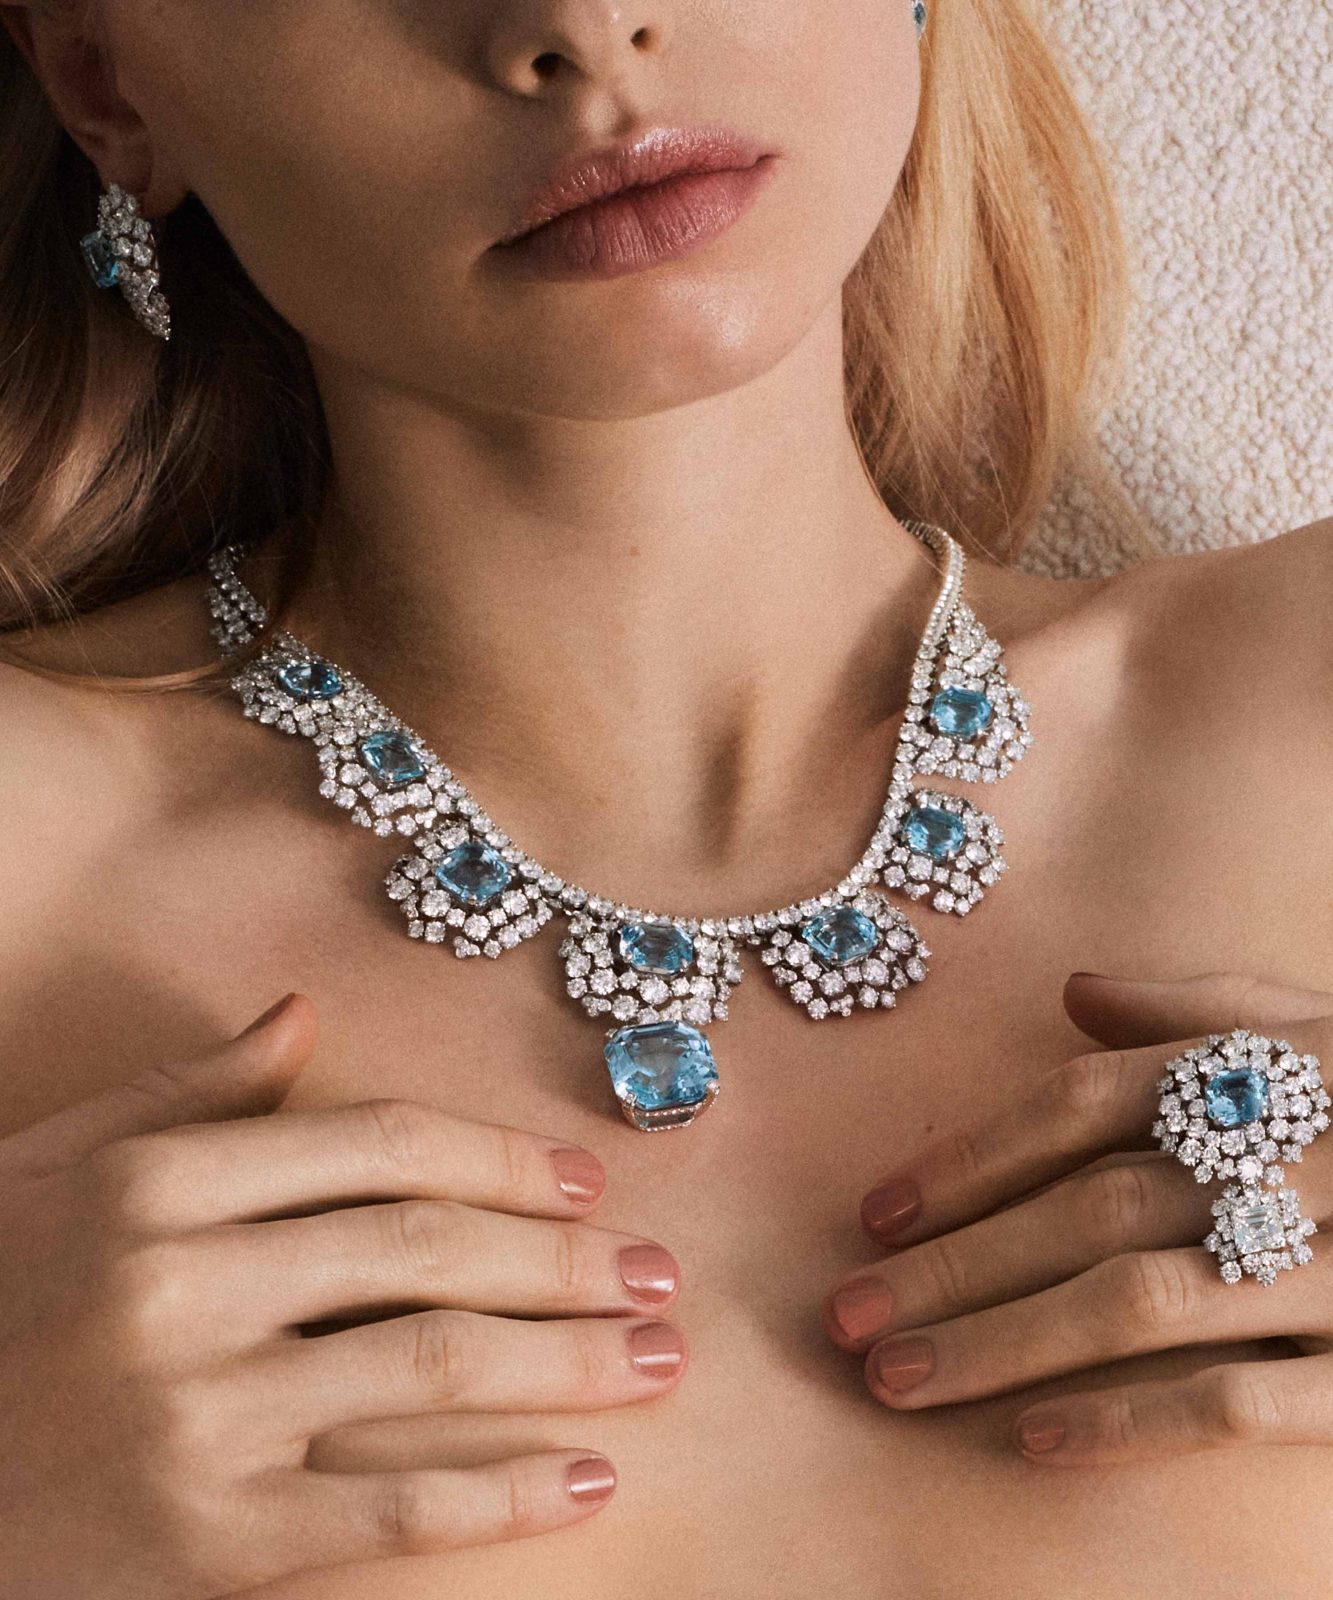 Tiffany & Co.'s latest High Jewellery collection dives into the